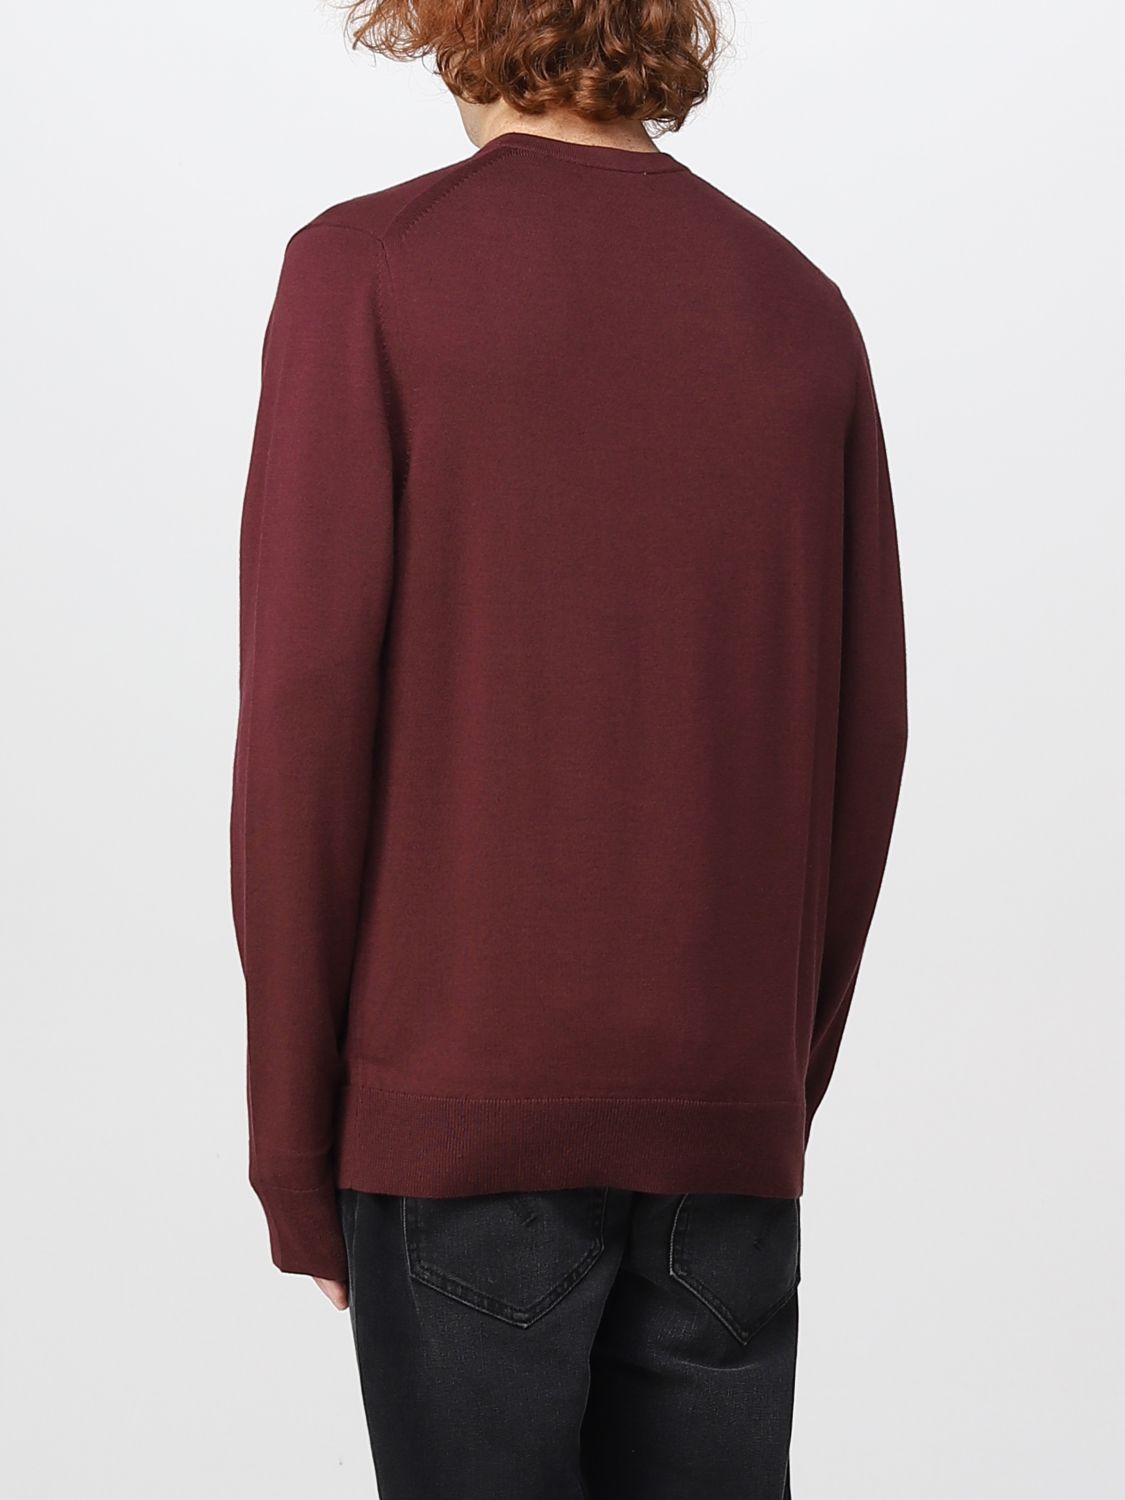 Jumper Fred Perry: Fred Perry jumper for men burgundy 2